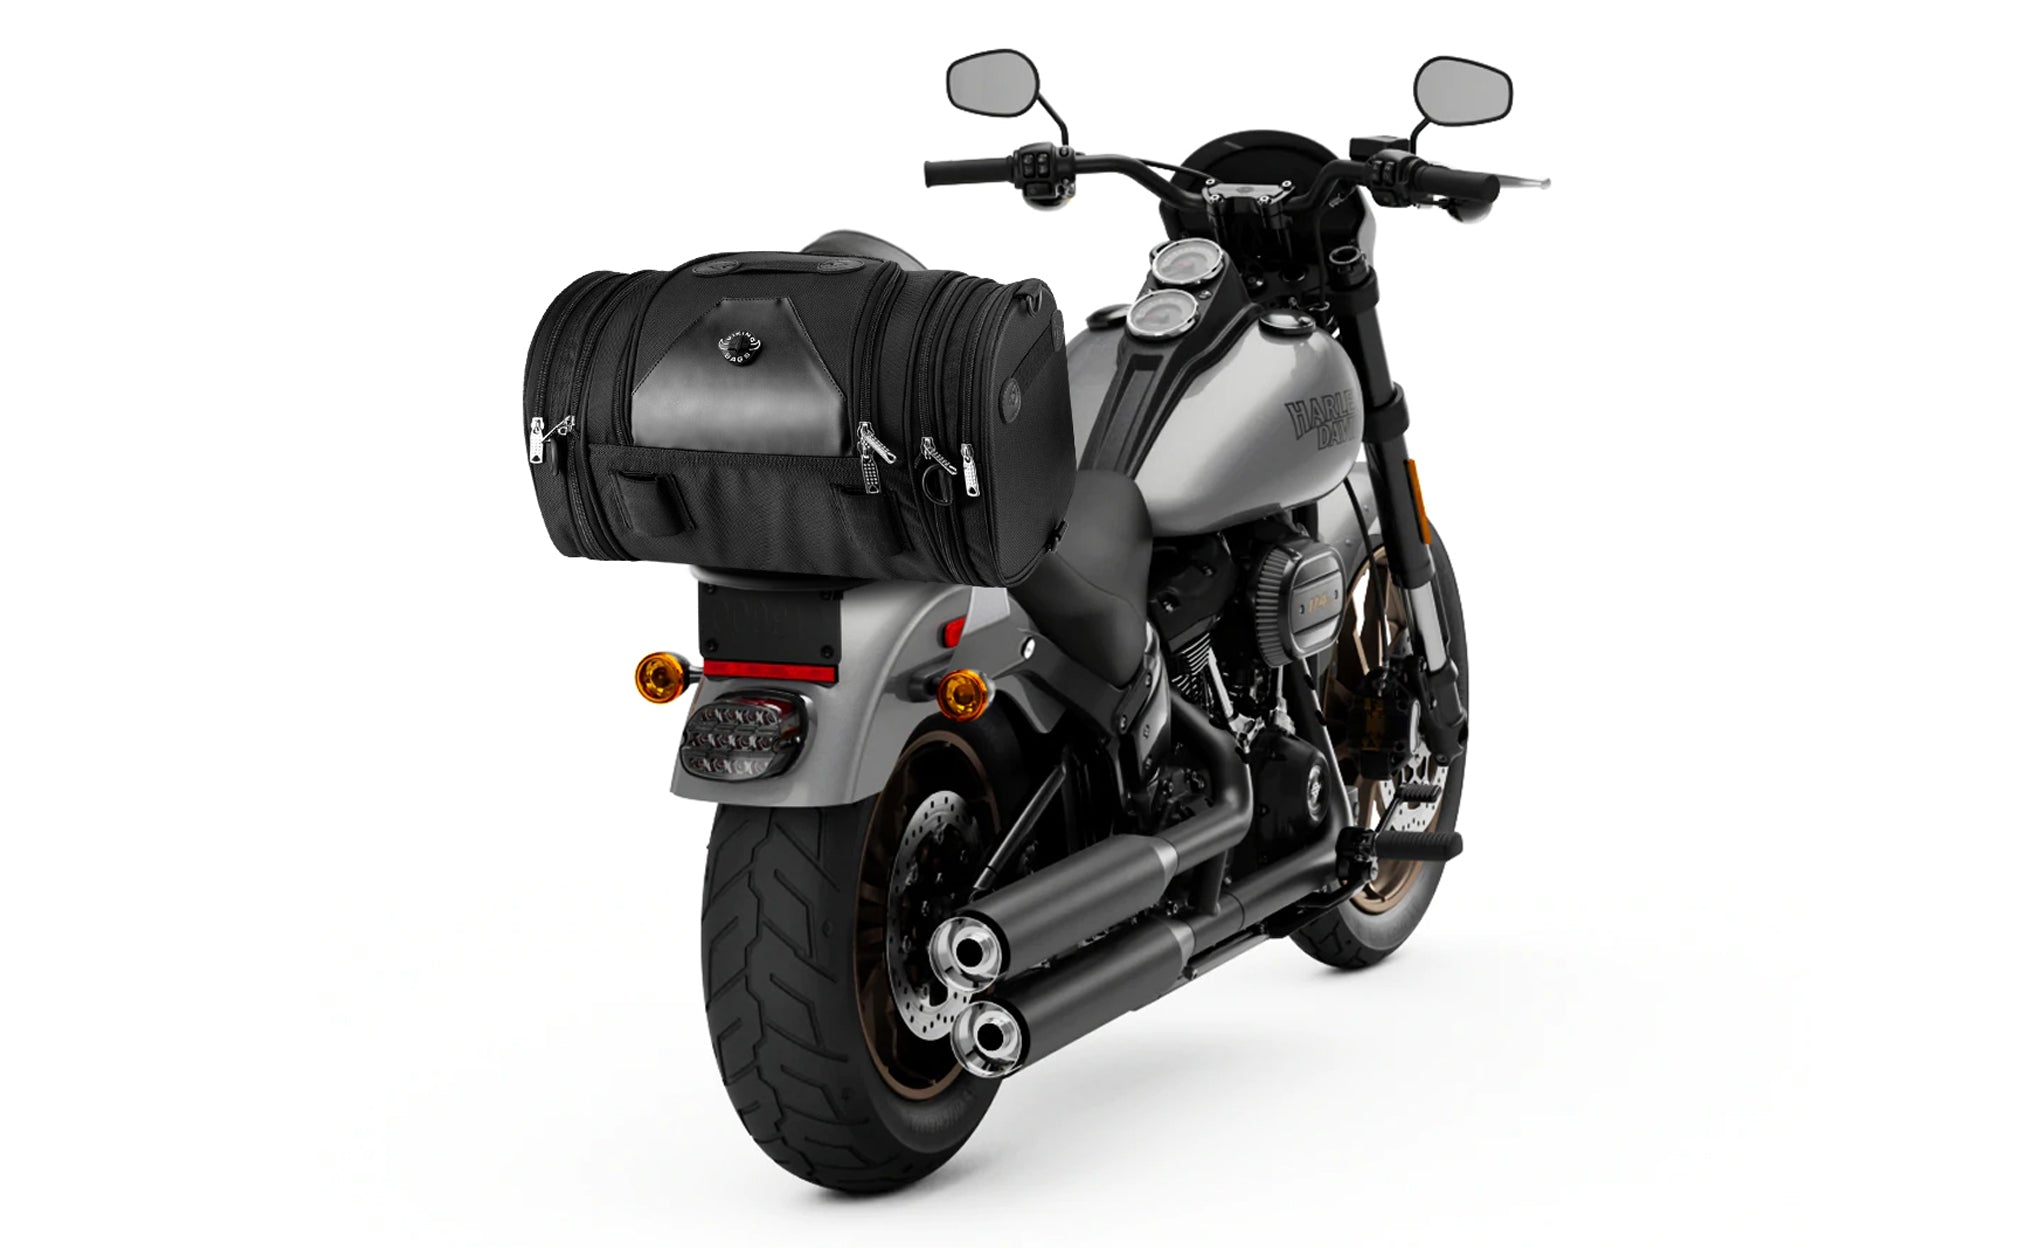 Viking Axwell Small Indian Motorcycle Tail Bag Bag on Bike View @expand